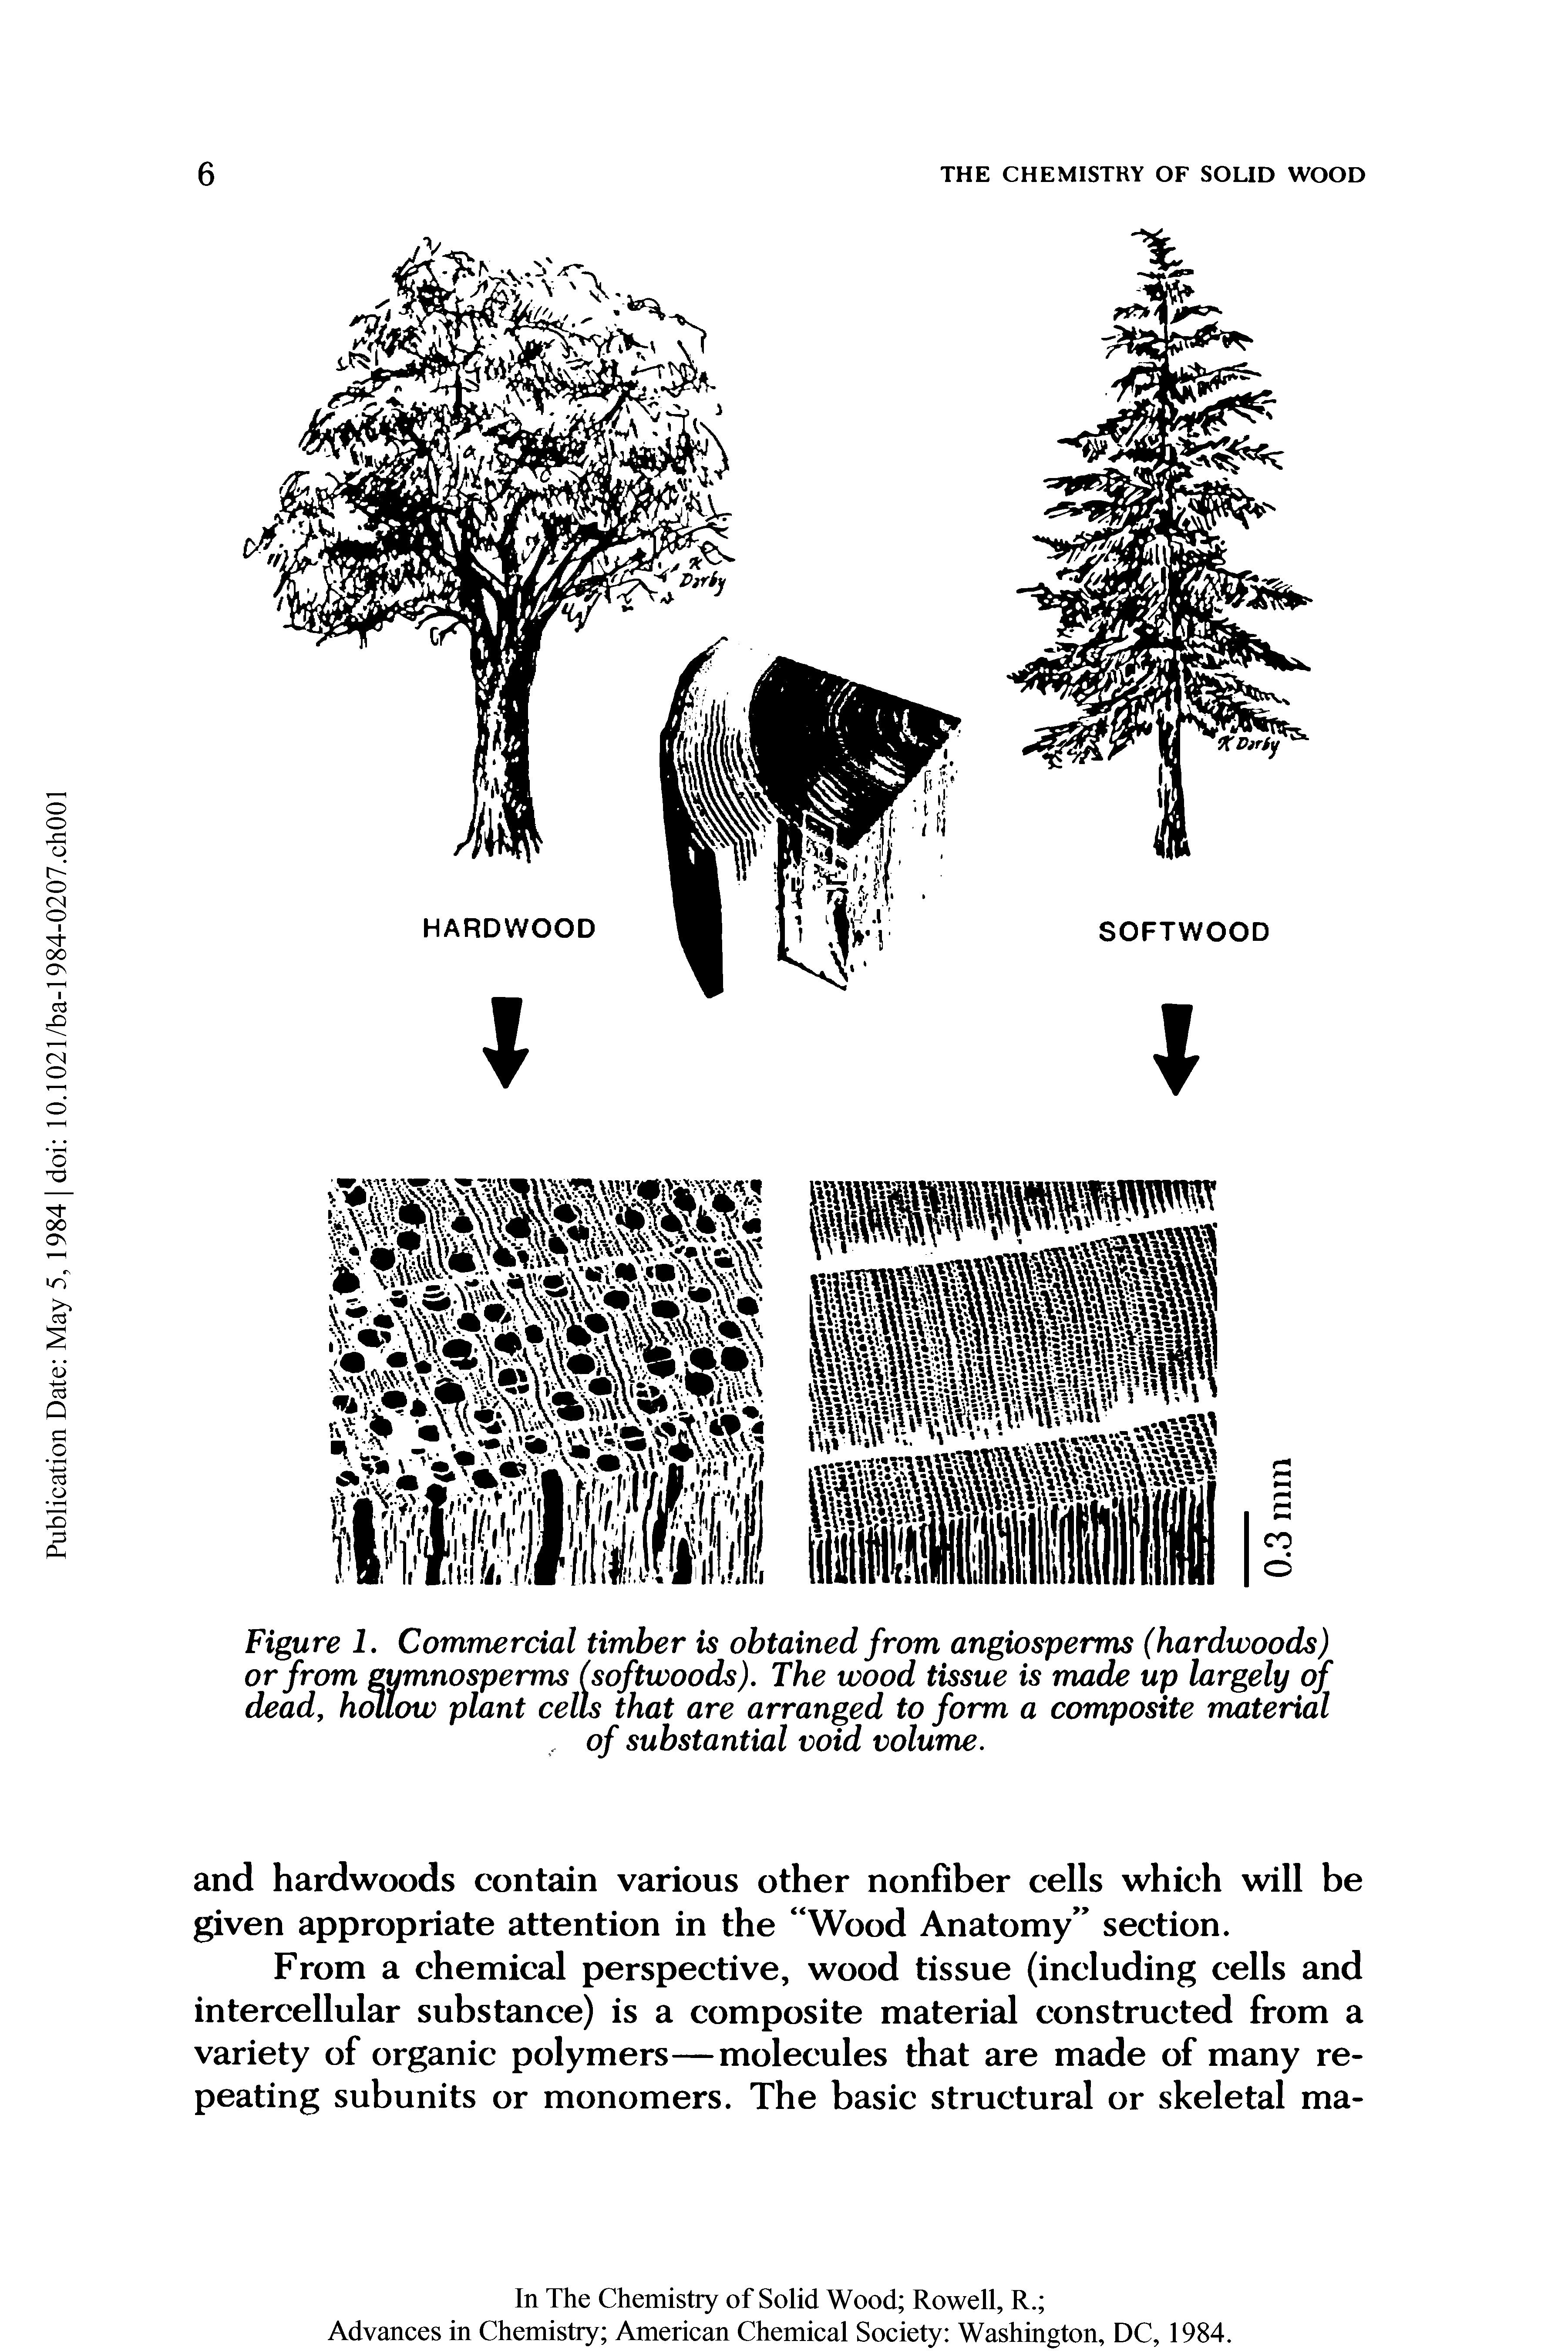 Figure 1. Commercial timber is obtained from angiosperms (hardwoods) or from gymnosperms (softwoods). The wood tissue is made up largely of dead, hollow plant cells that are arranged to form a composite material of substantial void volume.